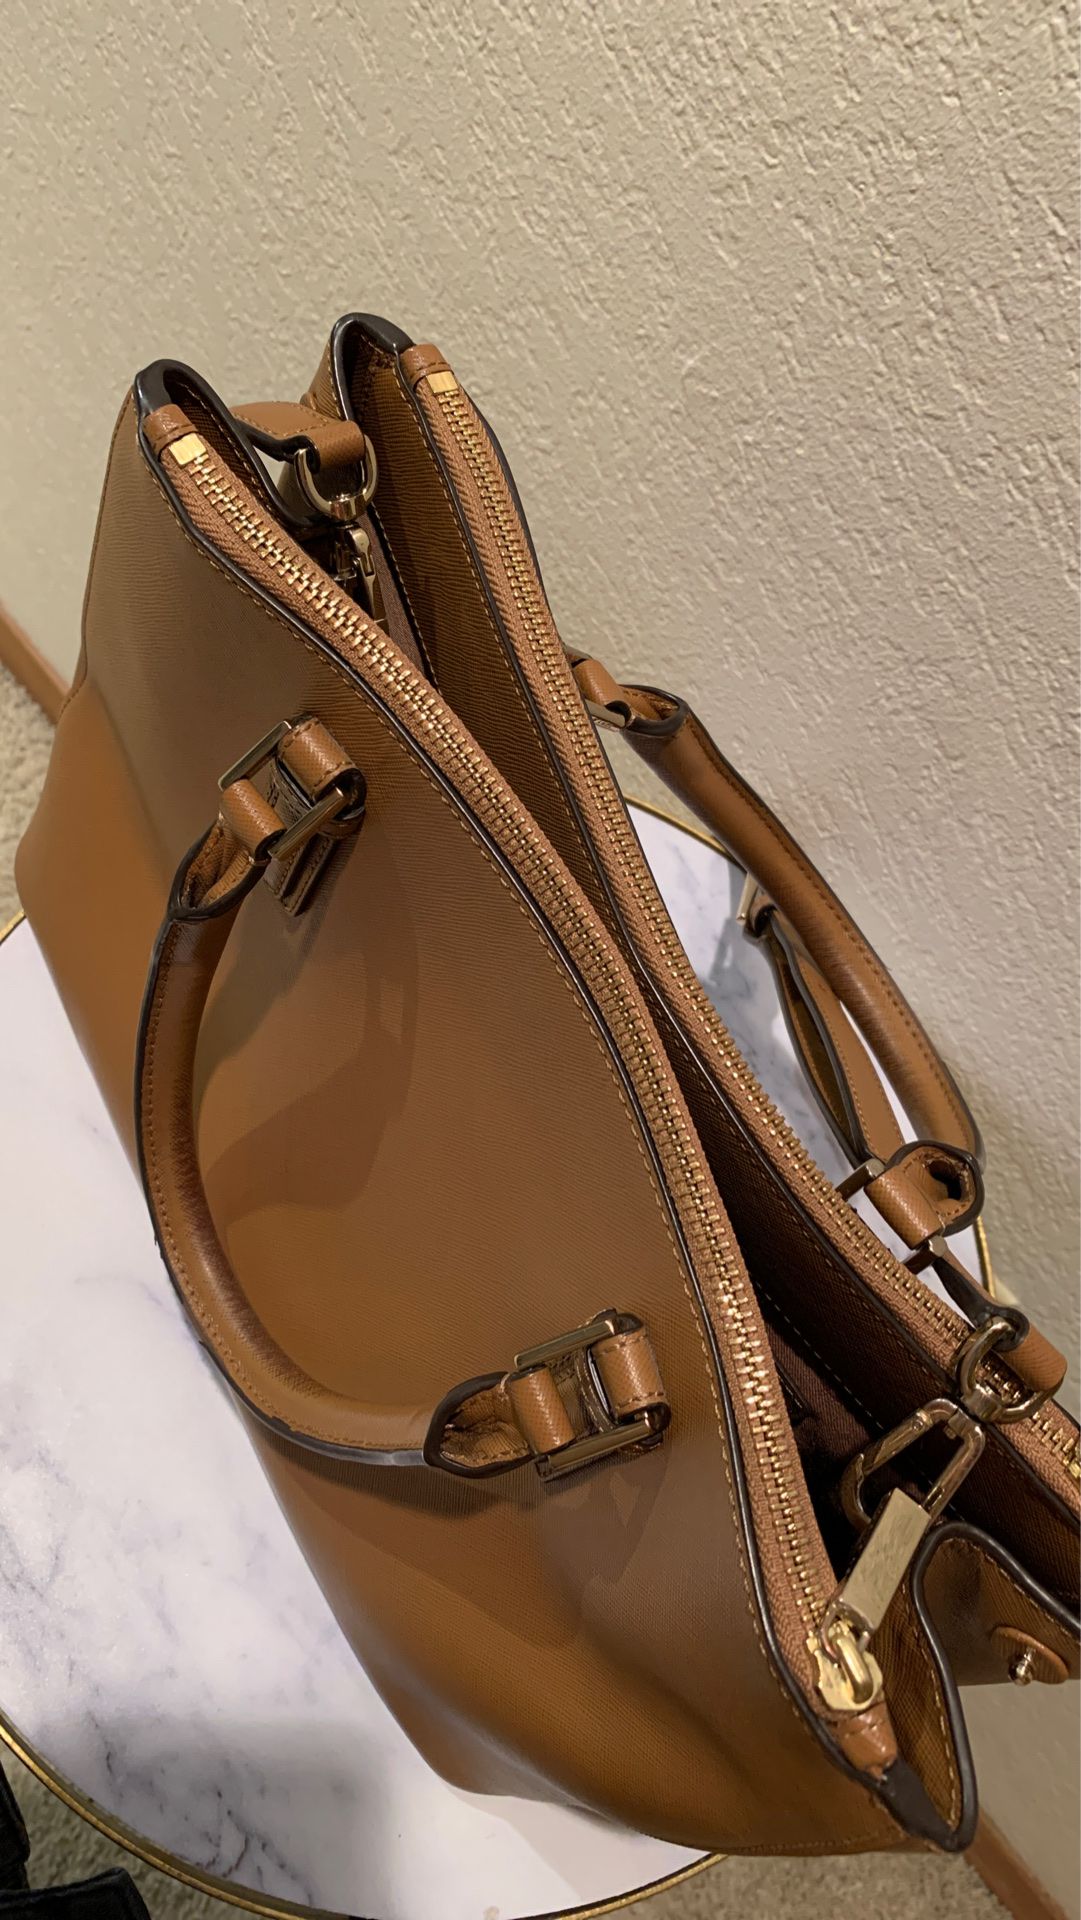 Tory Burch Saffiano Leather Bag for Sale in Seattle, WA - OfferUp